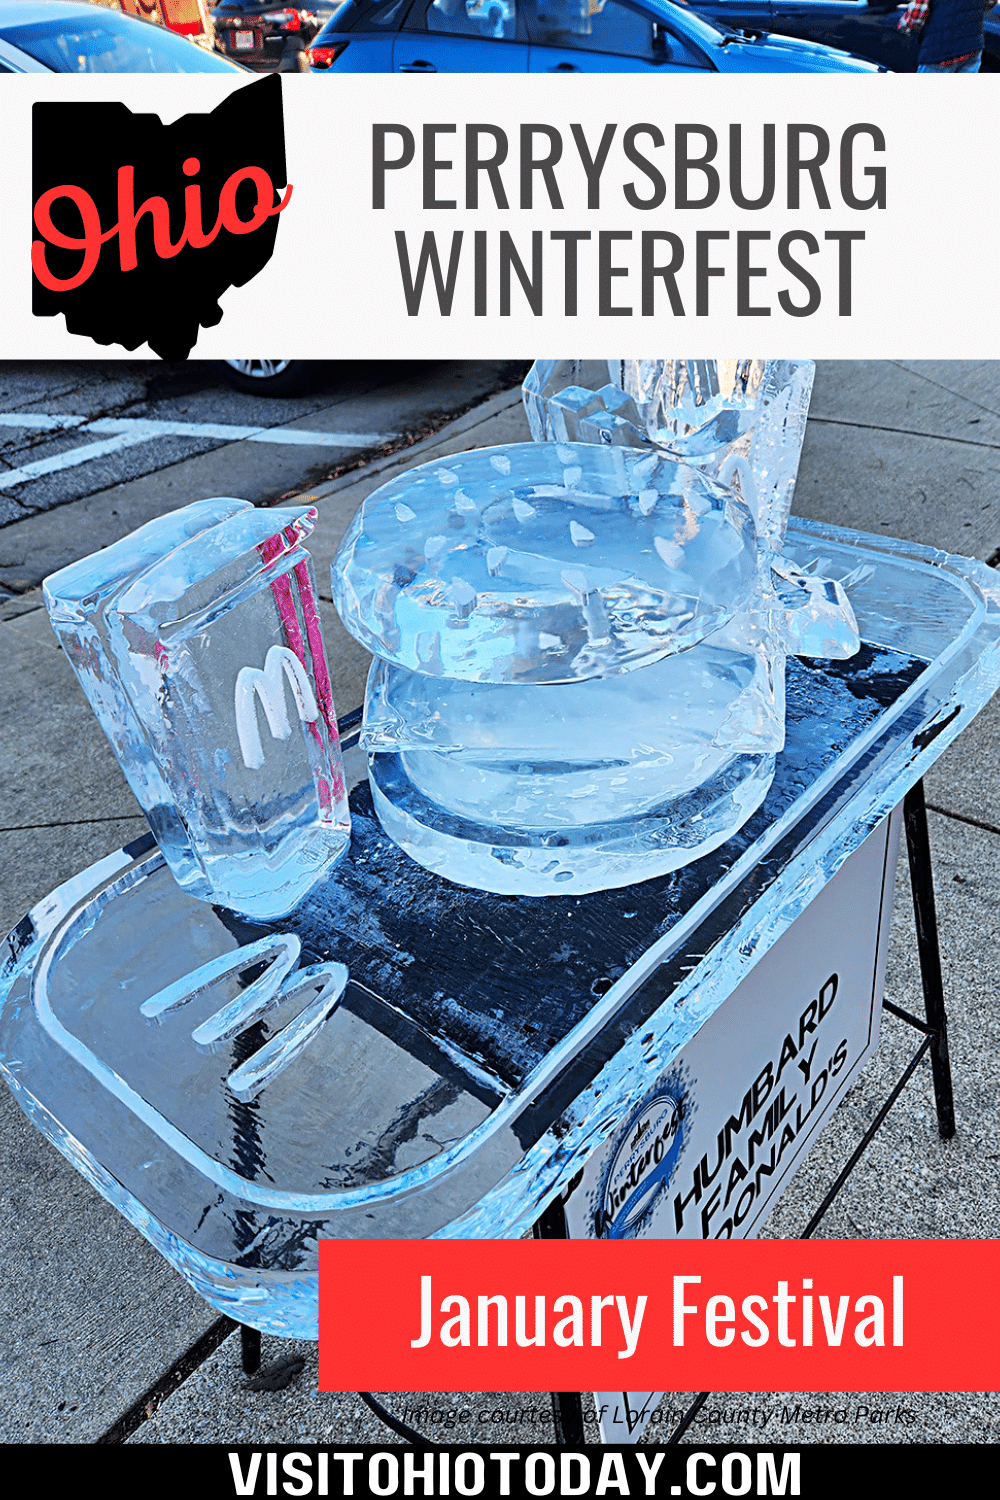 The 14th annual Perrysburg Winterfest is a winter festival featuring ice carvings that will return to historic downtown Perrysburg on Friday and Saturday January 12 and 13, 2024.